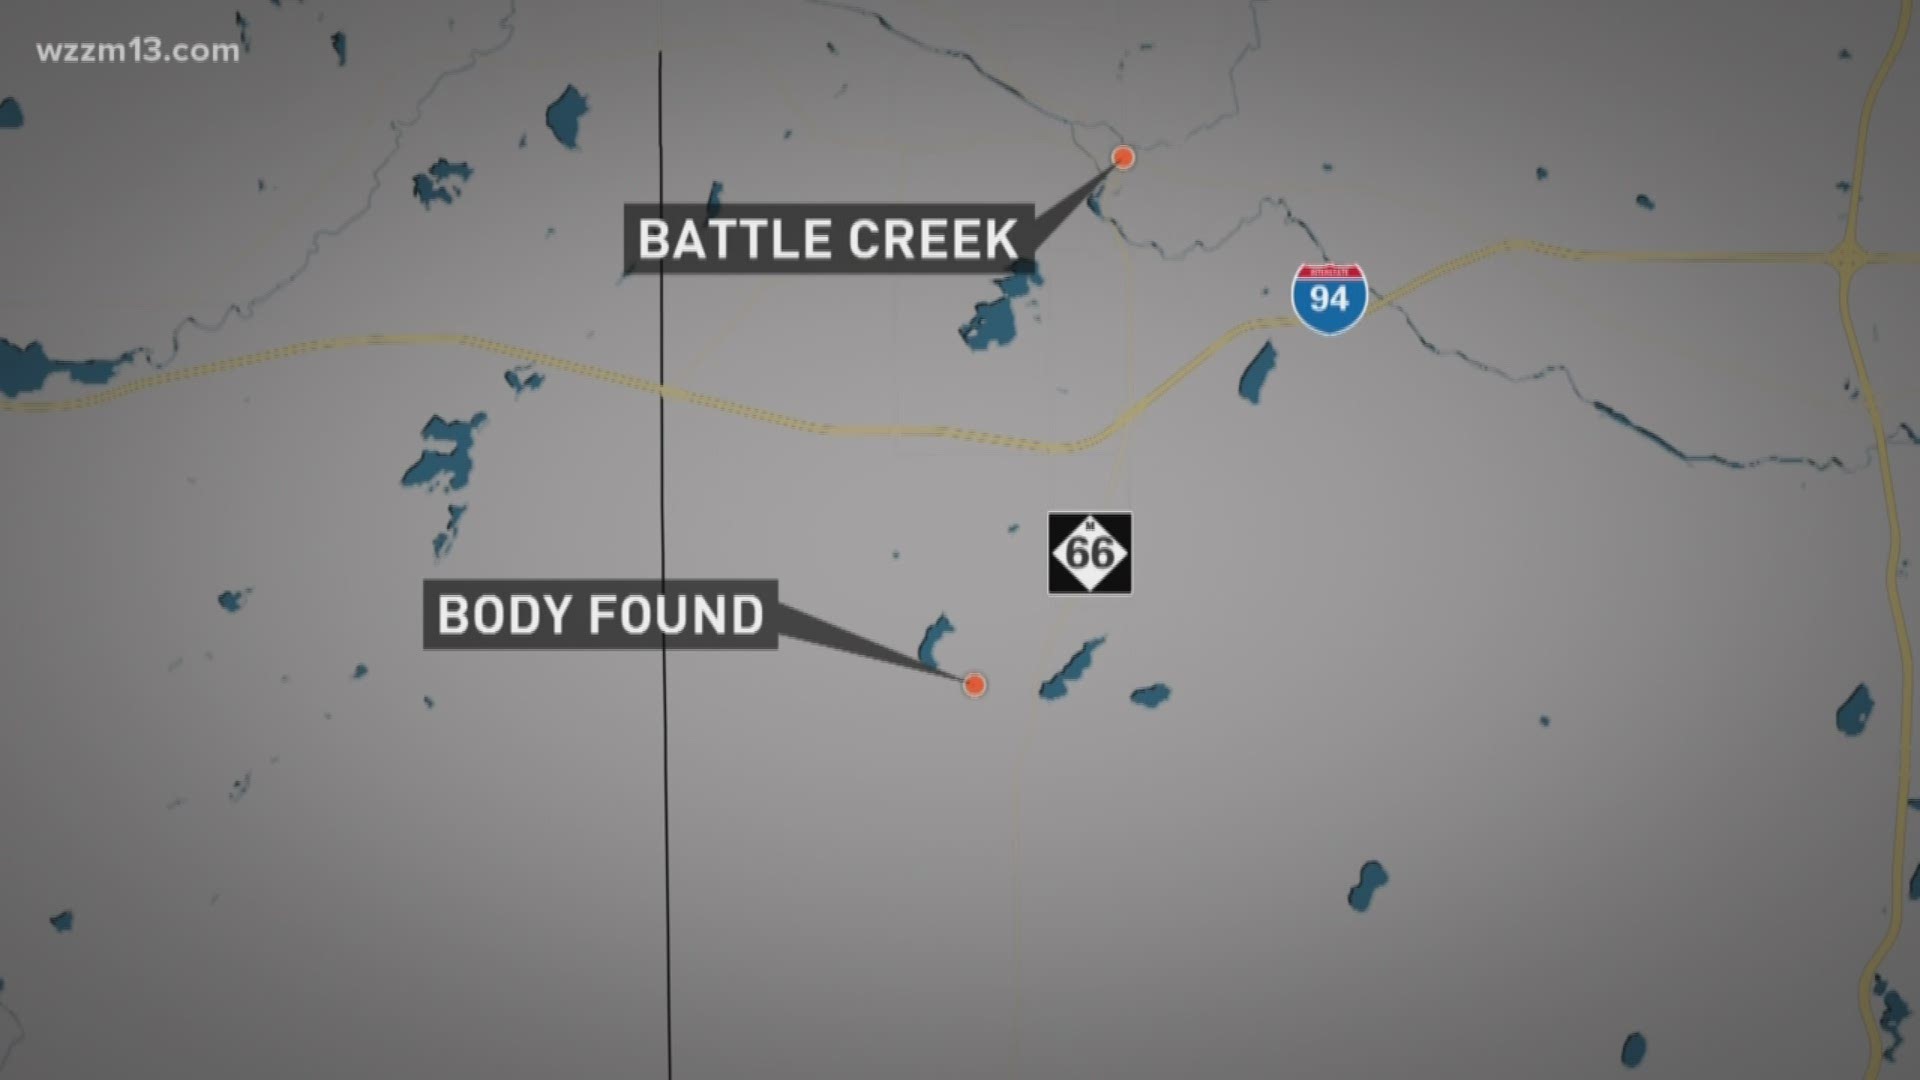 The 74-year old's body was found outside her home on four mile road in East LeRoy.